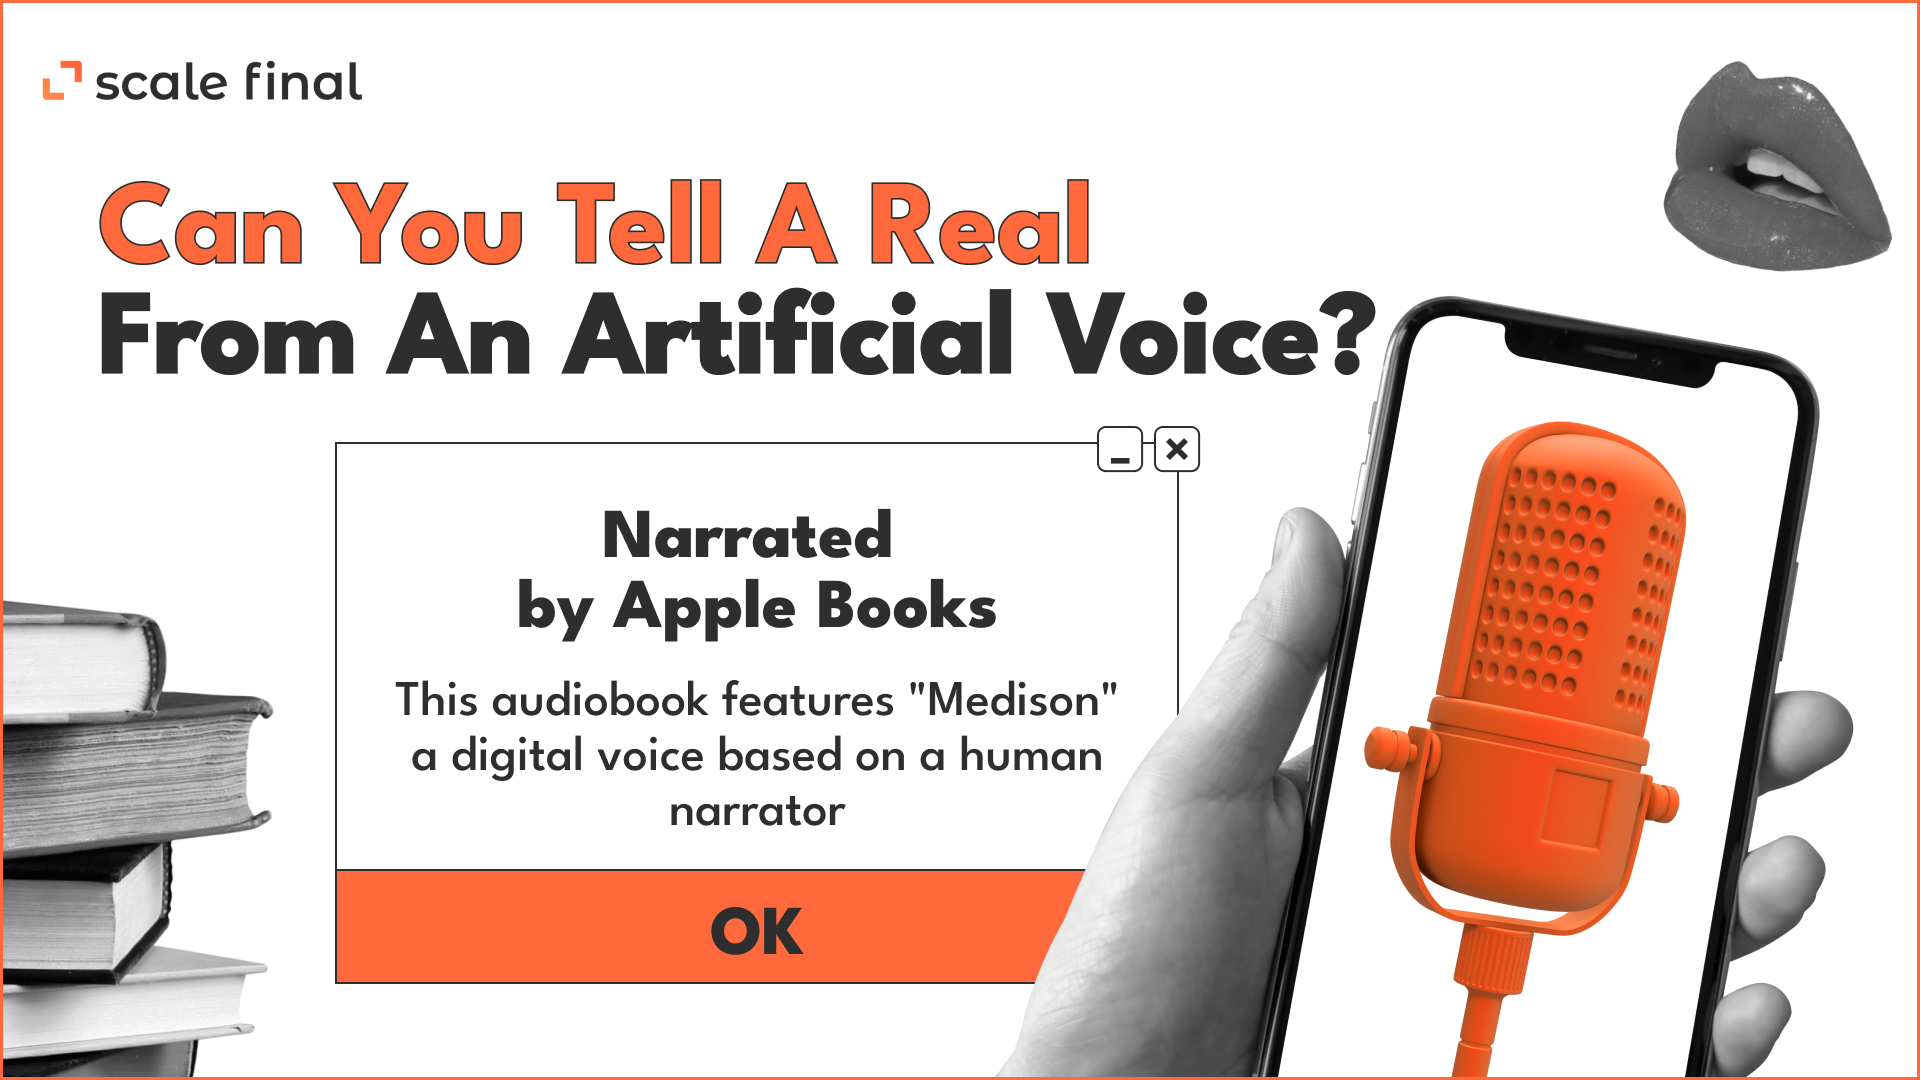 Can you tell a real from an artificial voice? 